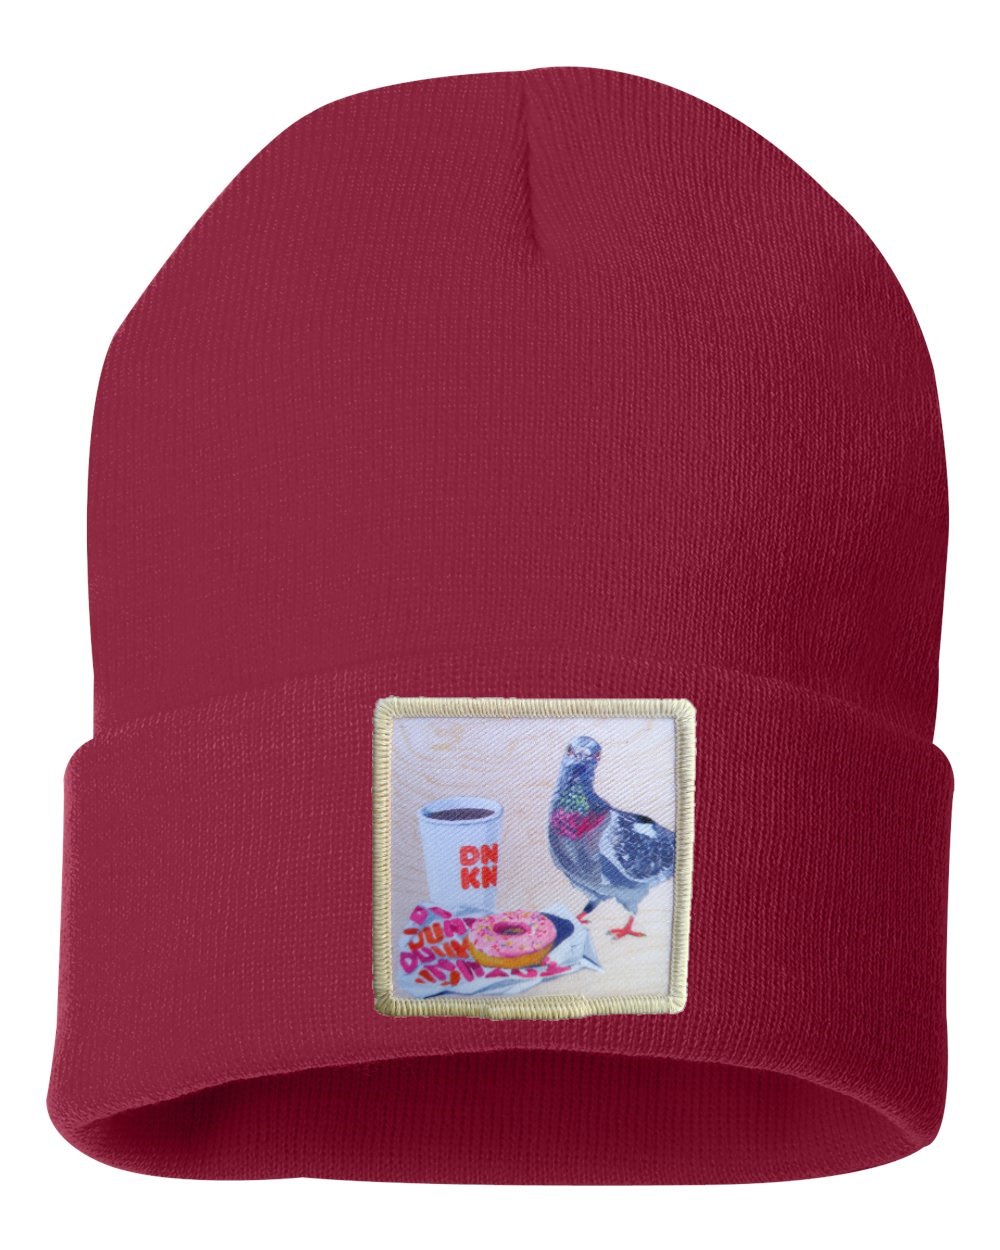 Pigeons Run on Donuts Beanie Hats Flyn Costello Cardinal Red  